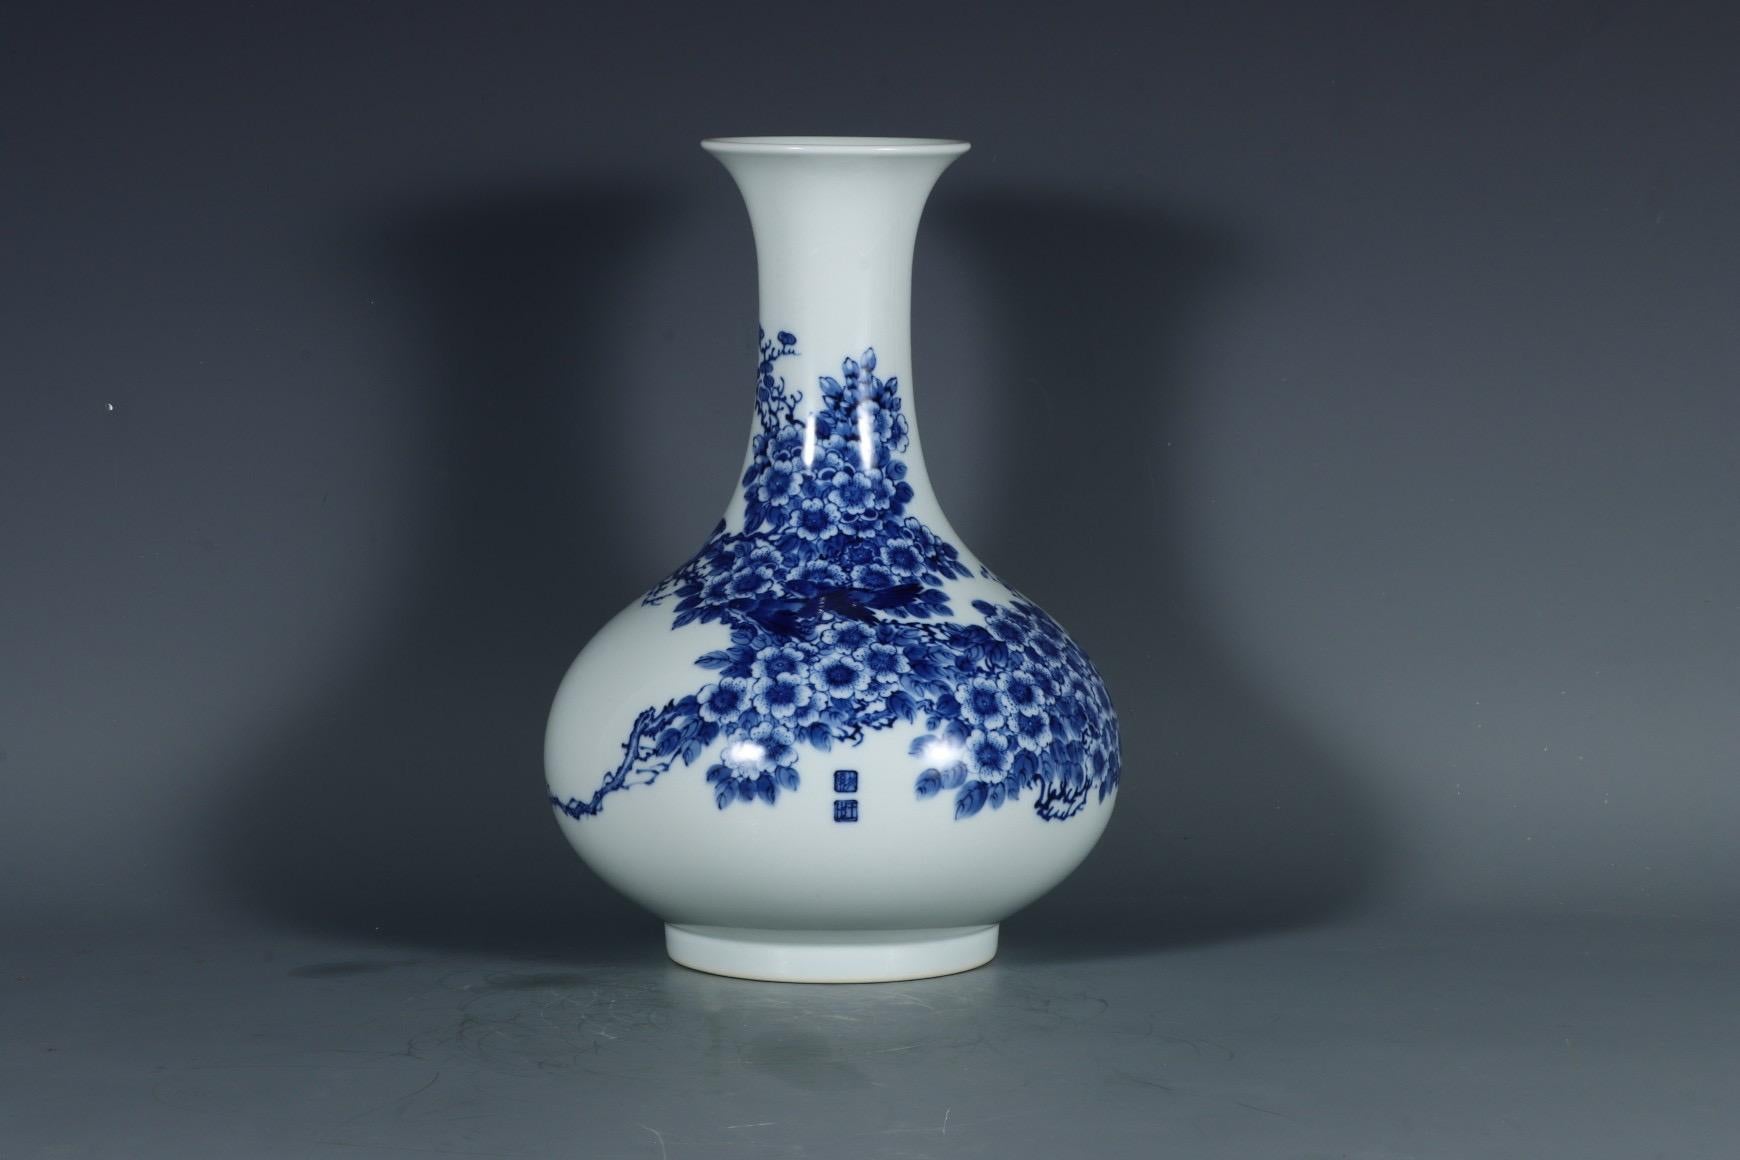 The Chinese hand-painted porcelain blue and white vase featuring birds and flowers is a classic example of traditional Chinese ceramic art. Blue and white porcelain has a long and esteemed history in China, dating back to the Yuan Dynasty